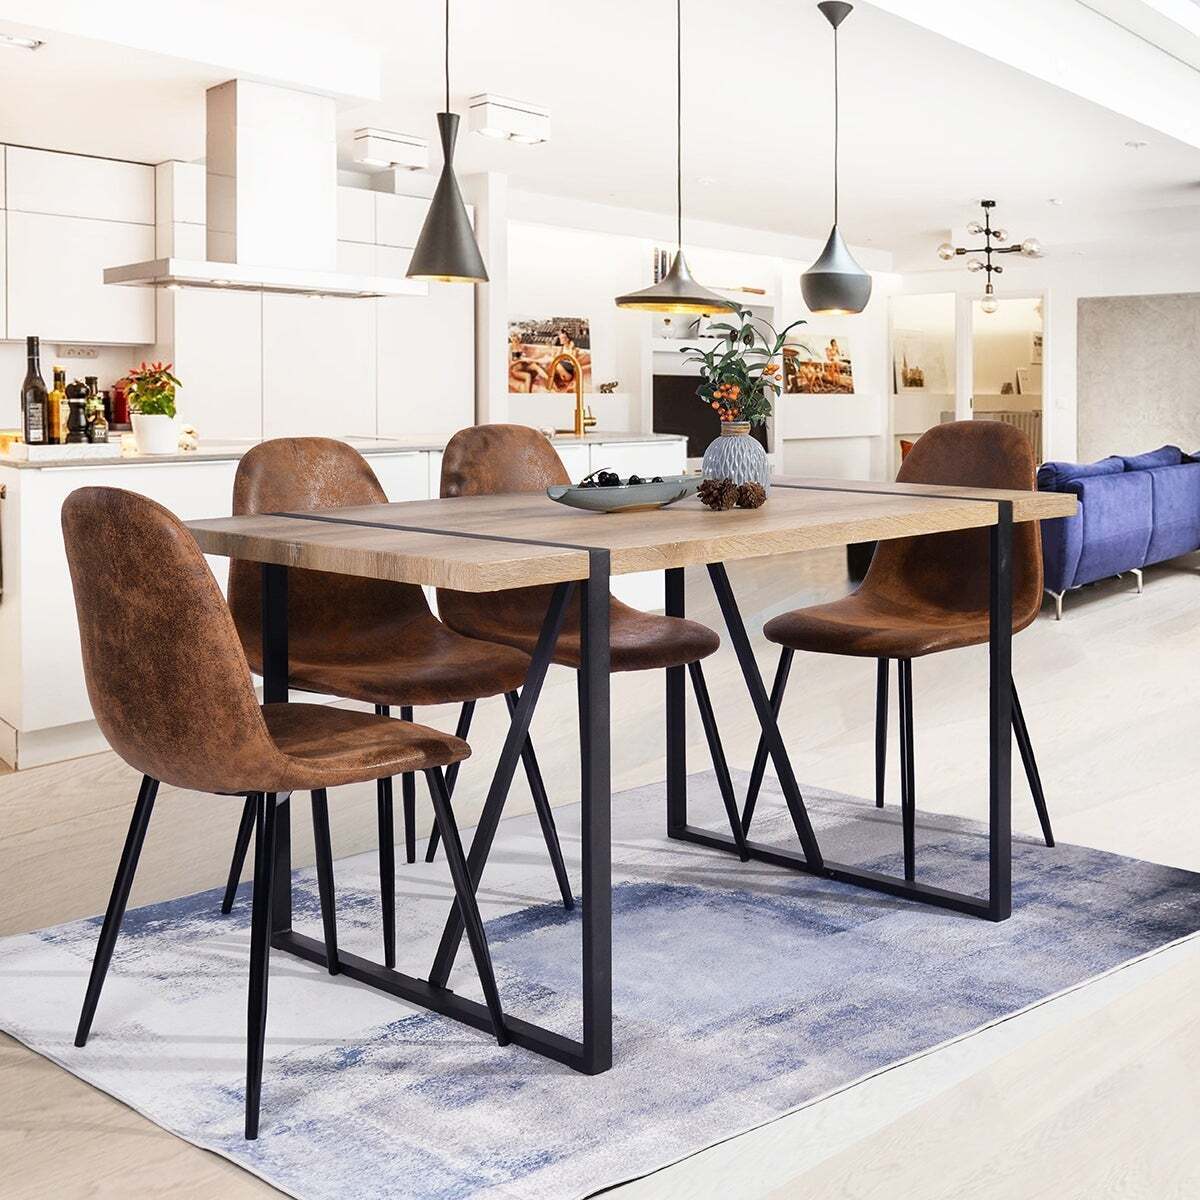 Contemporary Industrial Dining Table